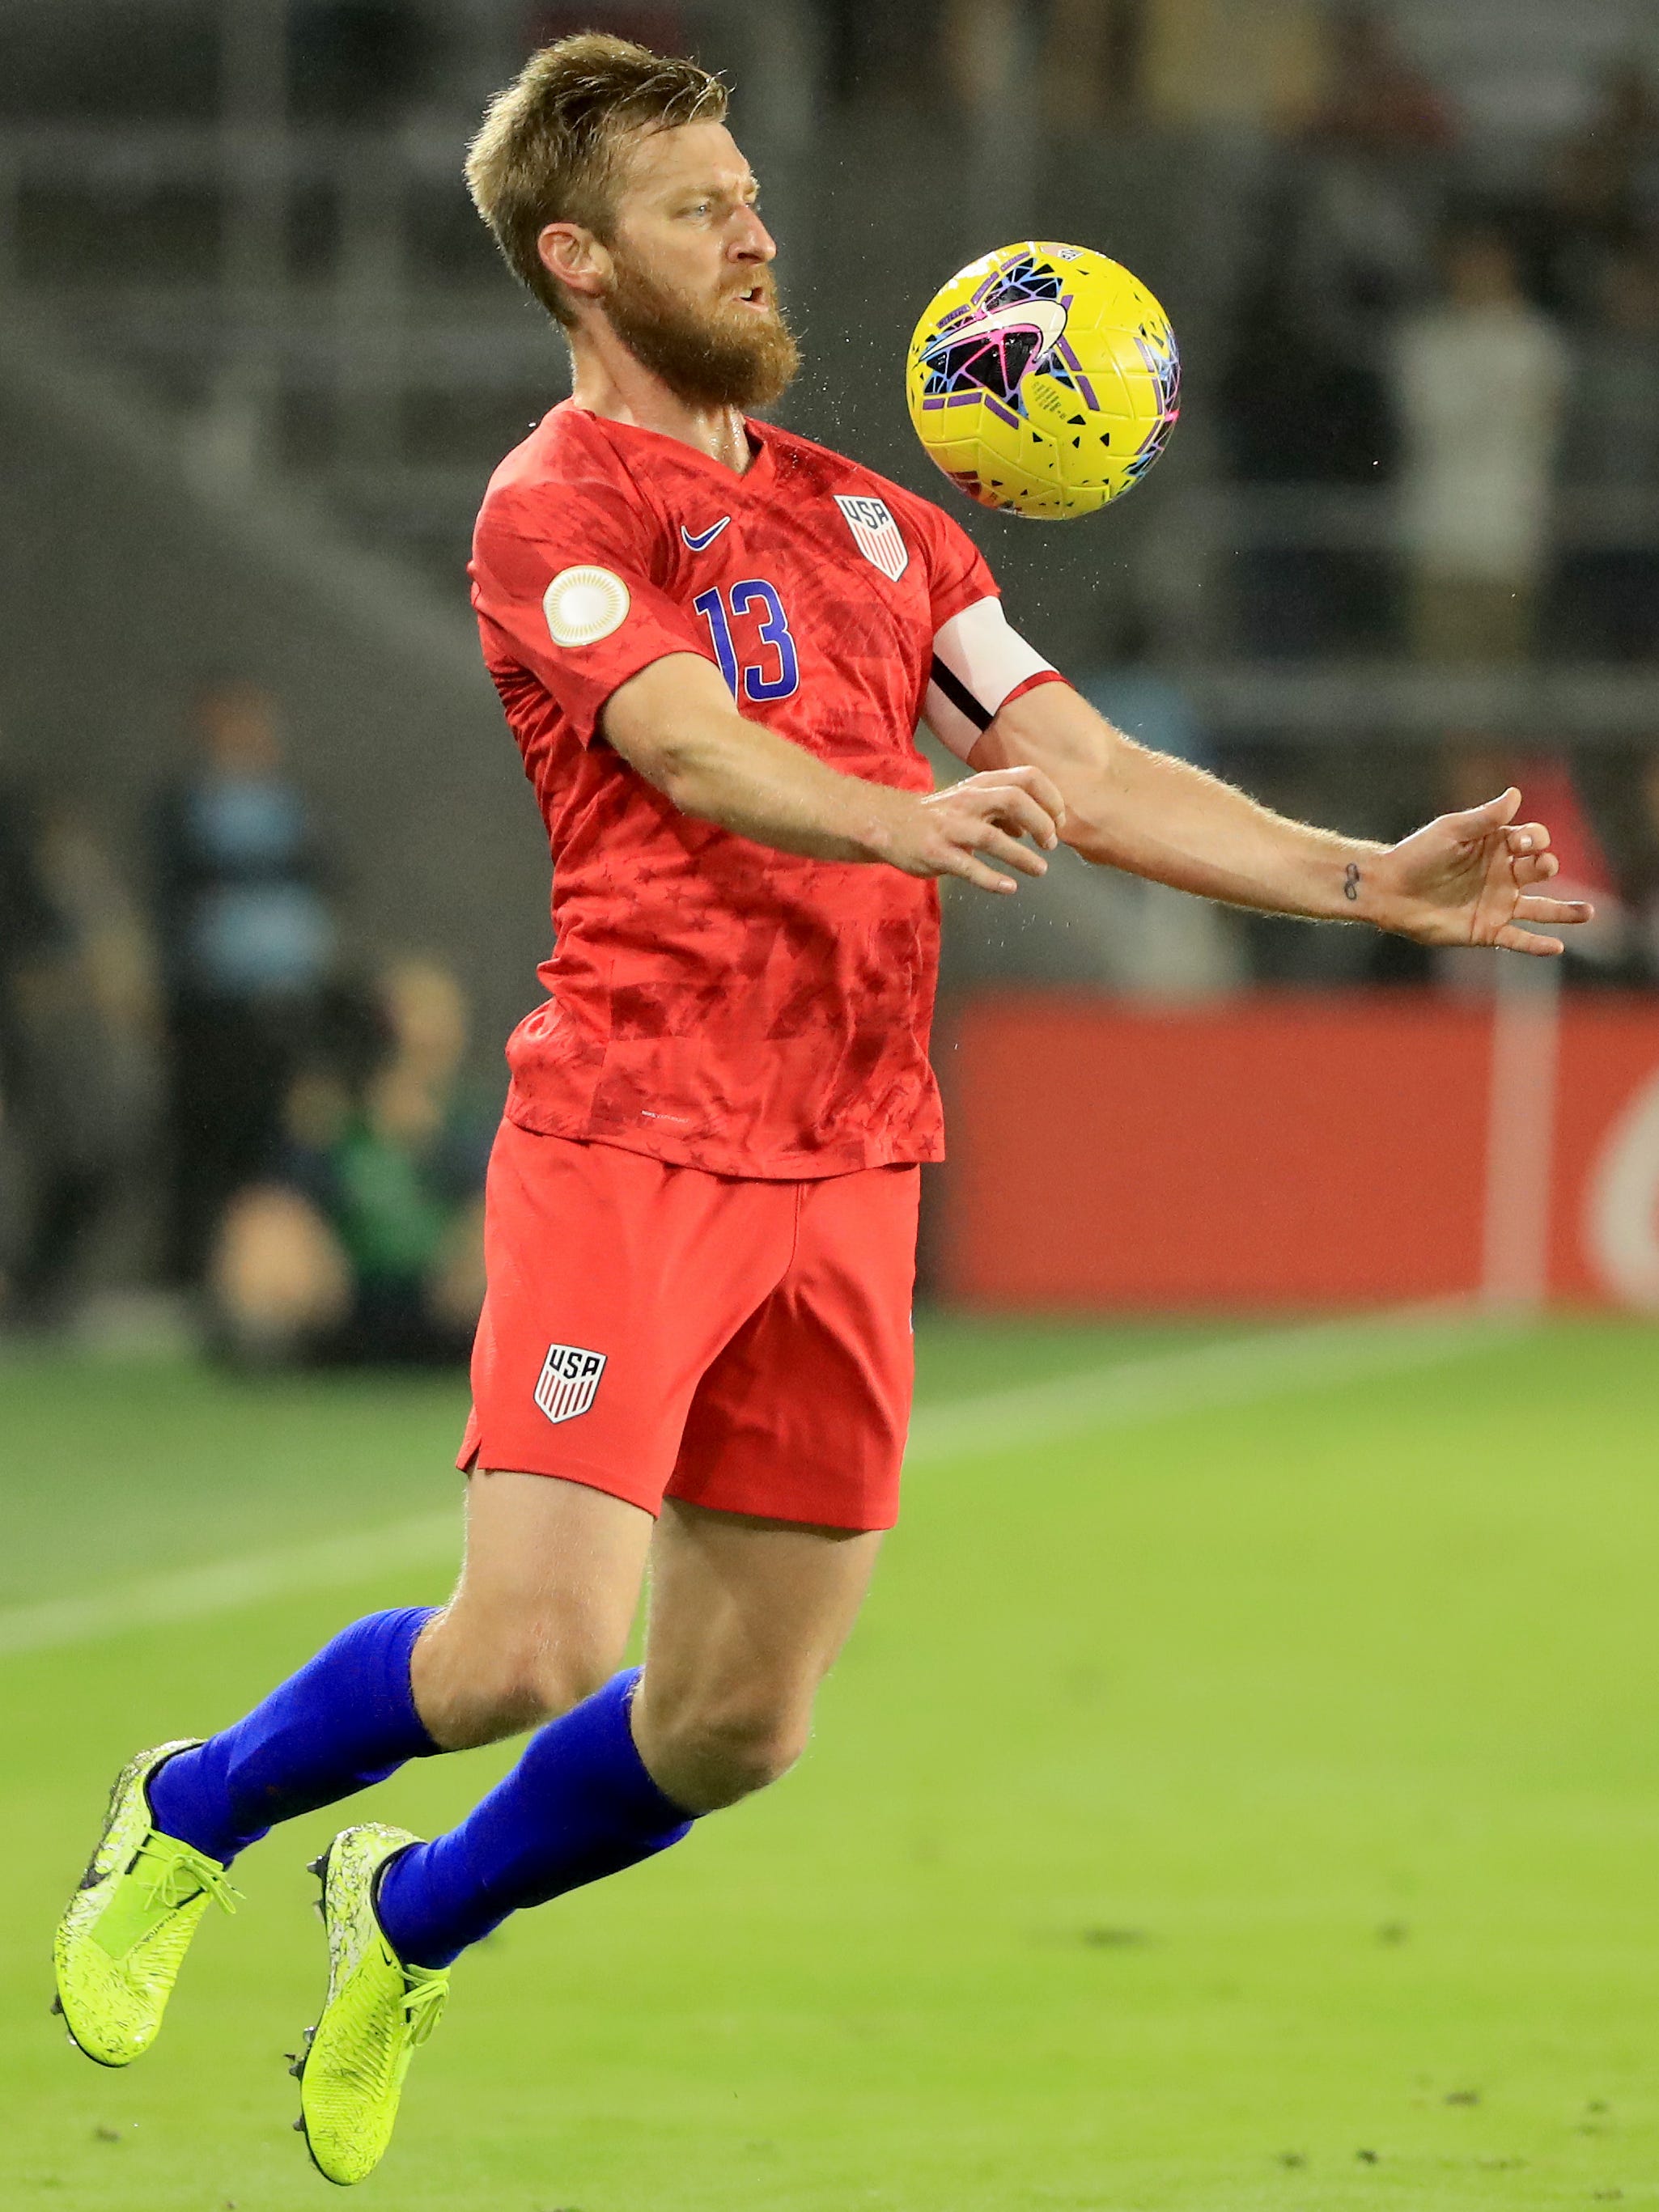 An action image of Tim Ream  playing soccer.